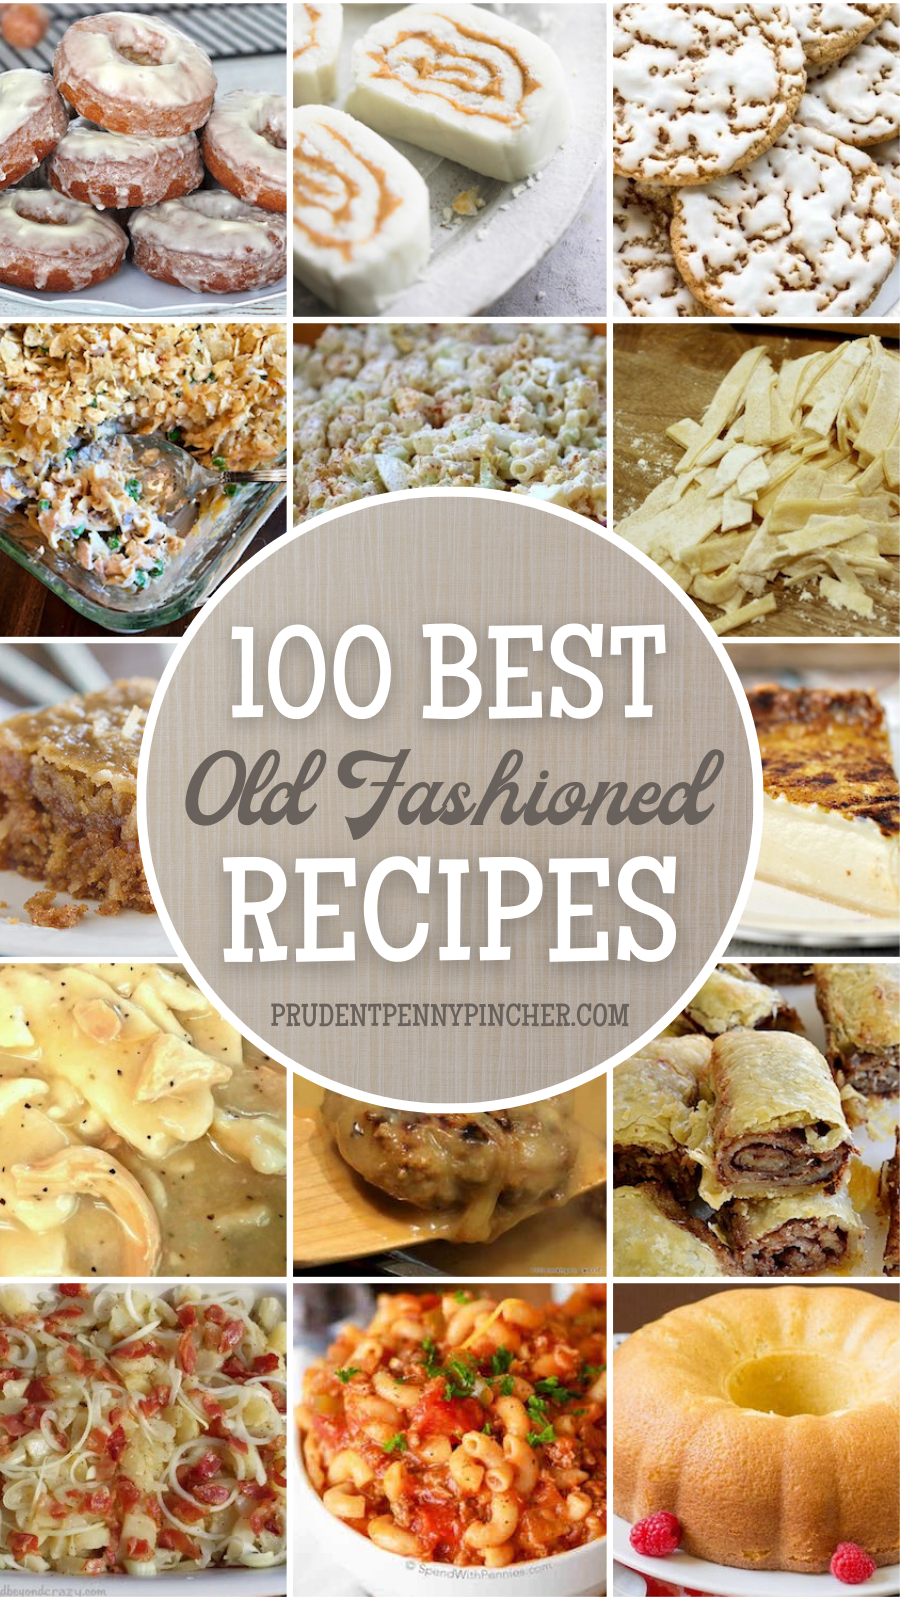 100 Best Old Fashioned Recipes